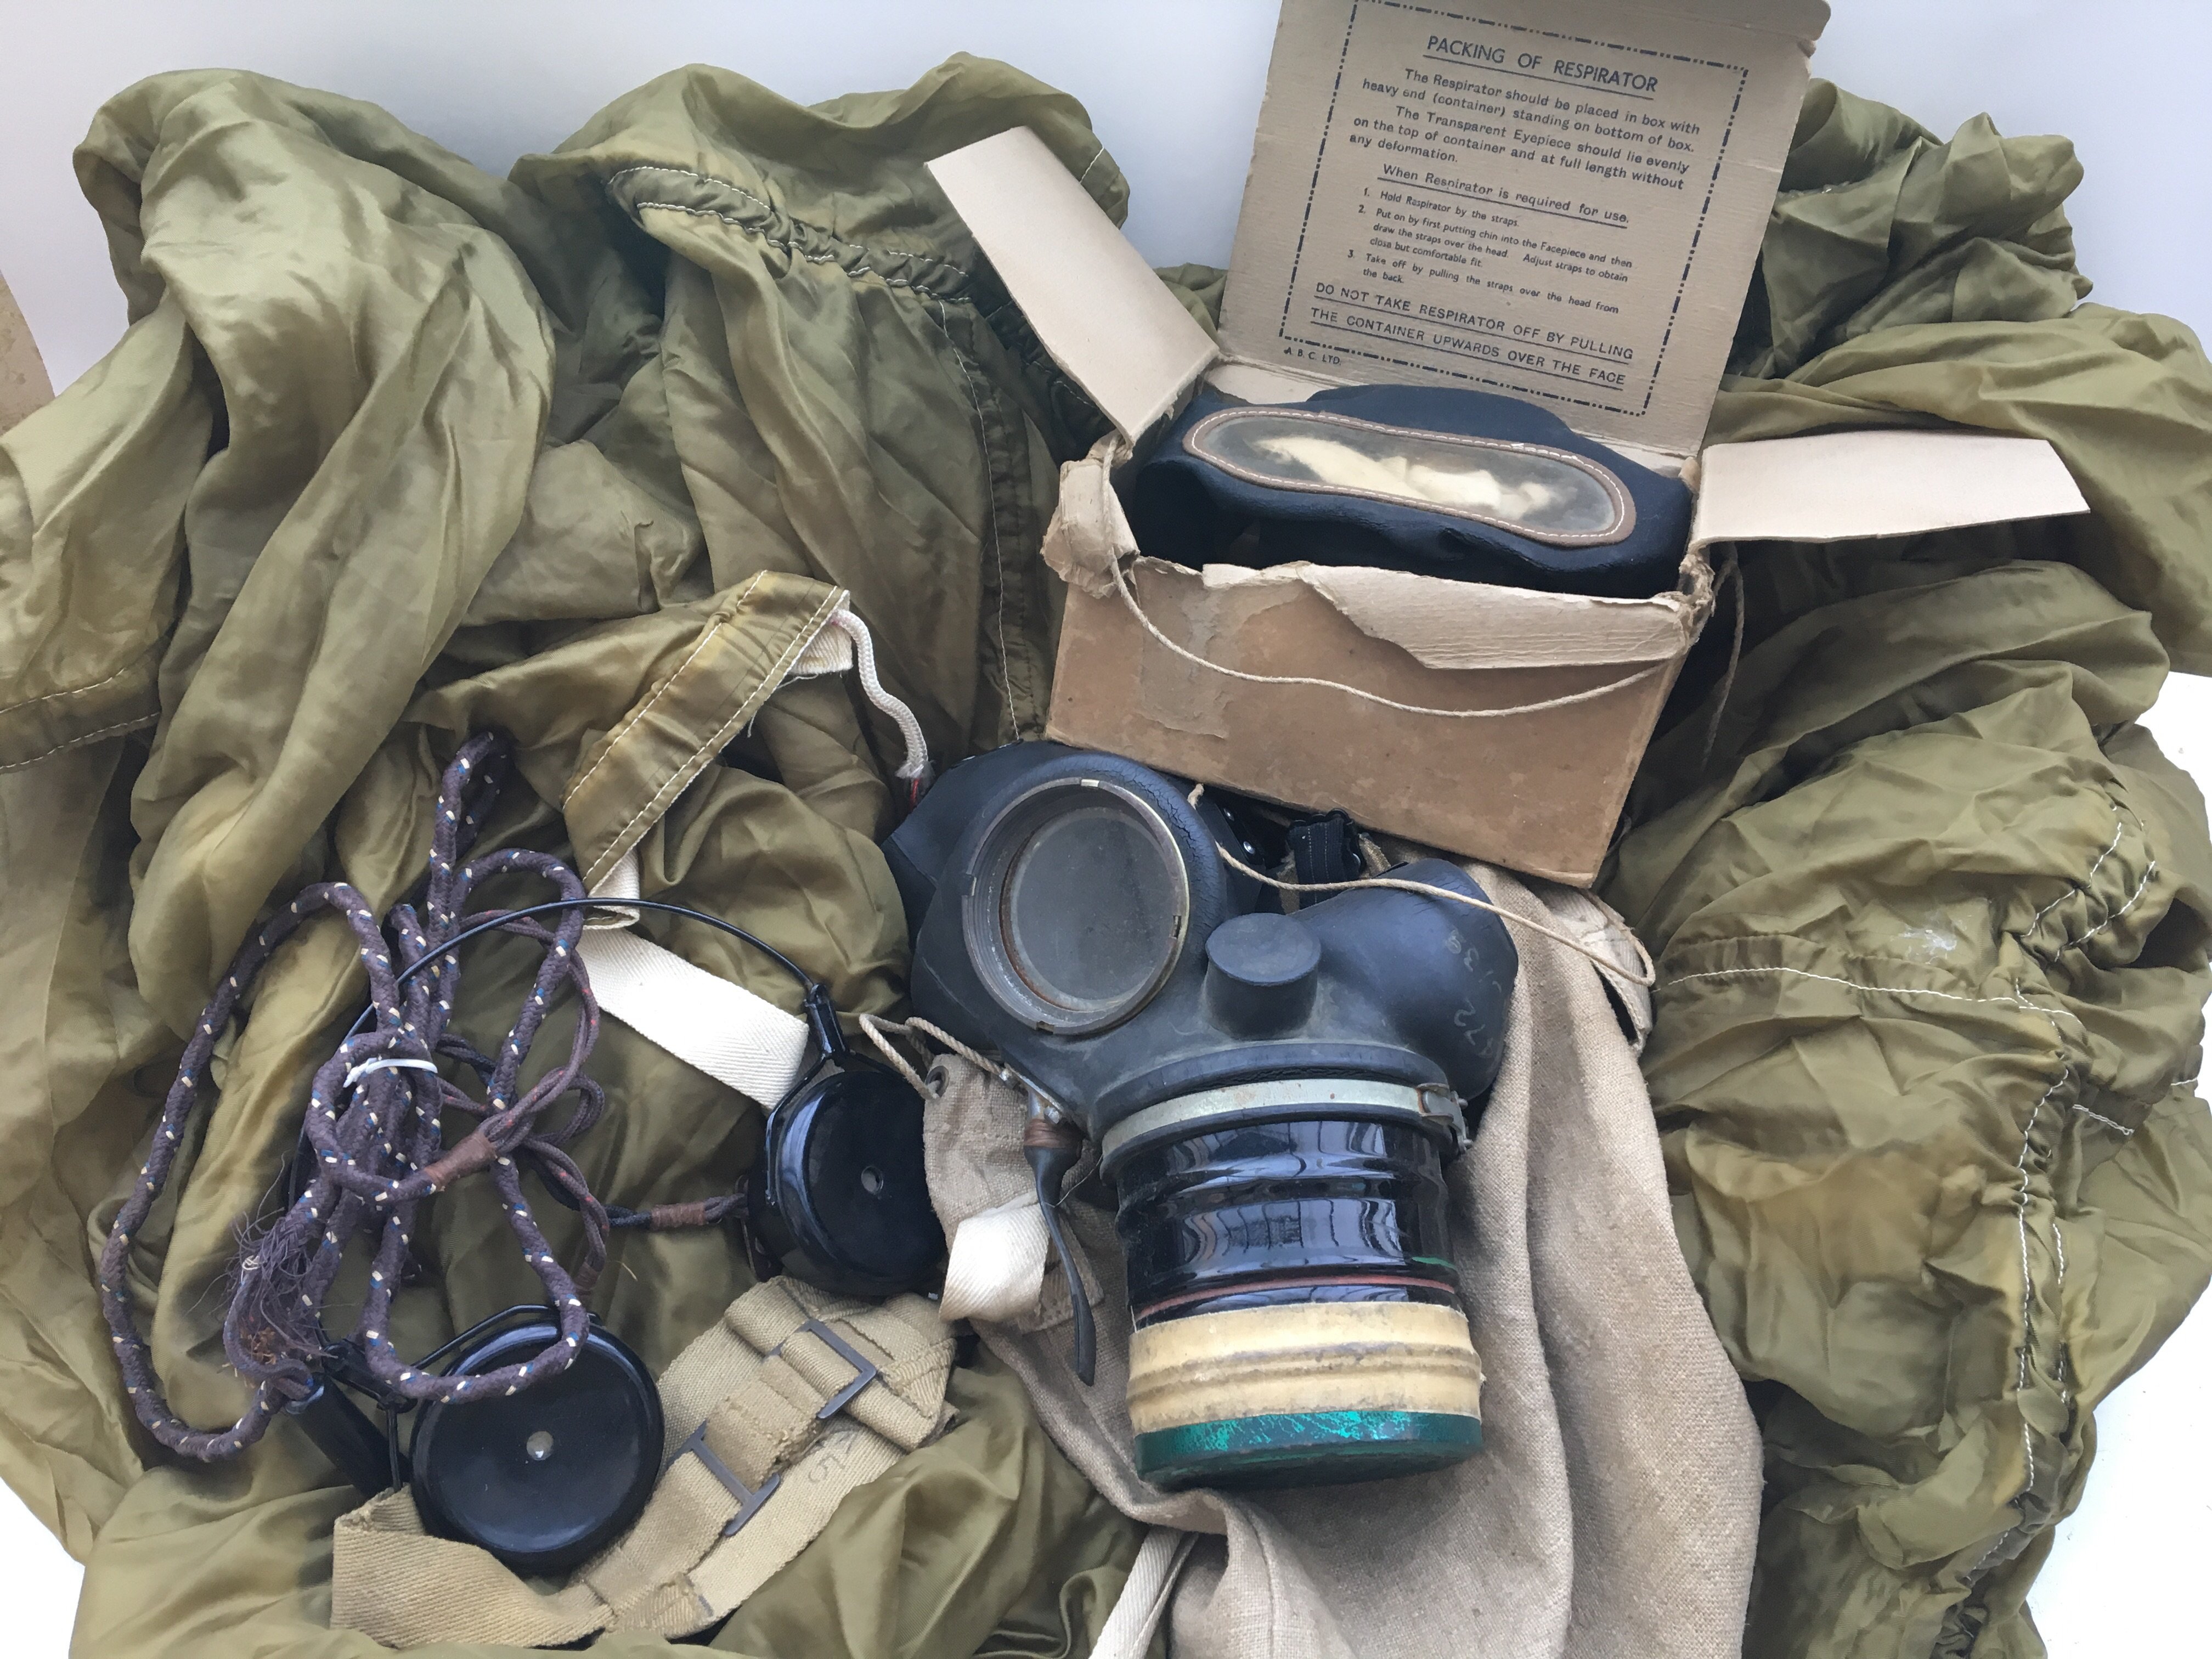 Items from WW2 including a parachute, gas mask in cloth bag and respirator in original box